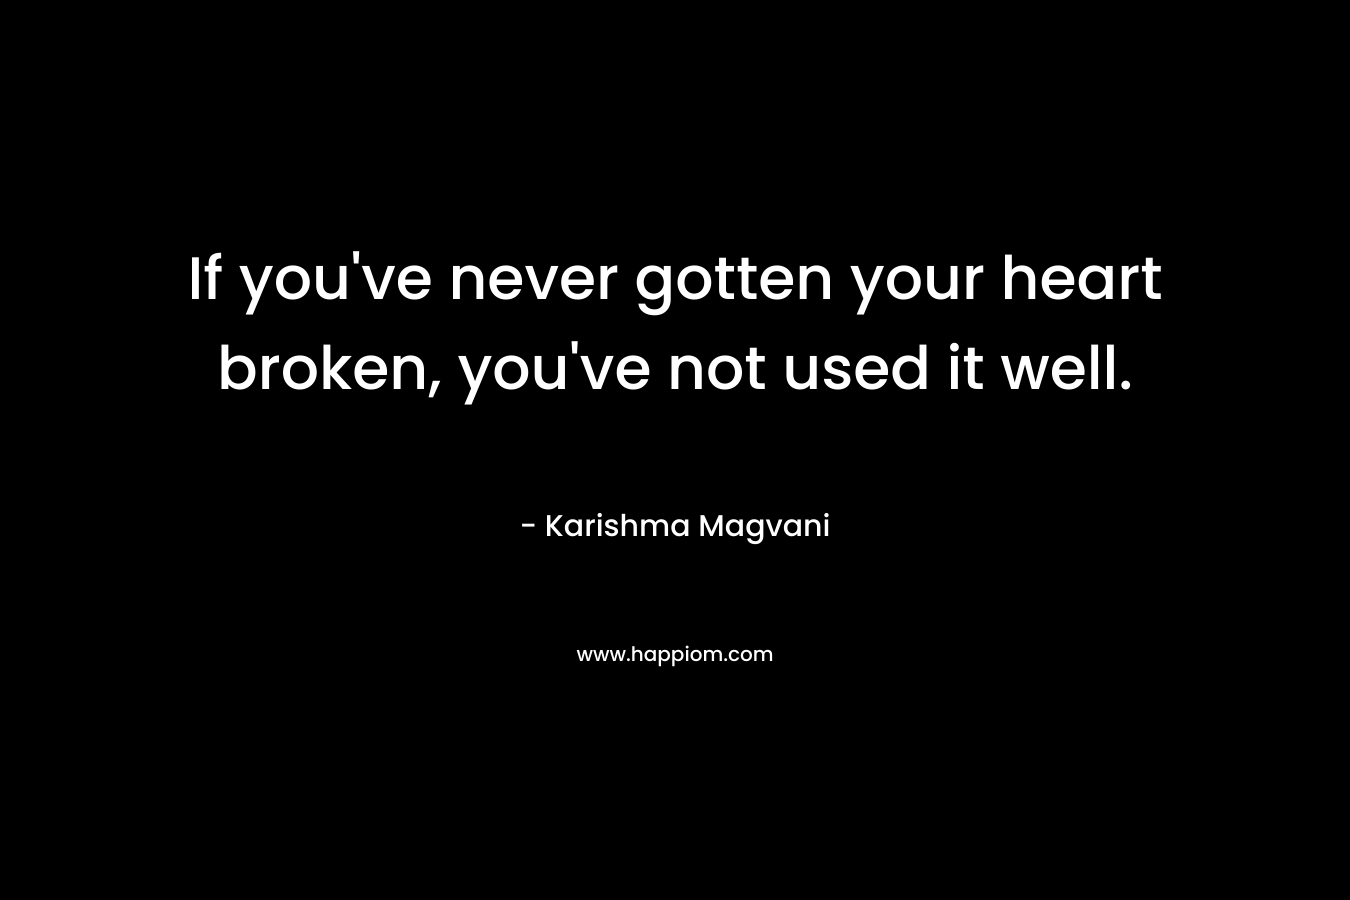 If you've never gotten your heart broken, you've not used it well.